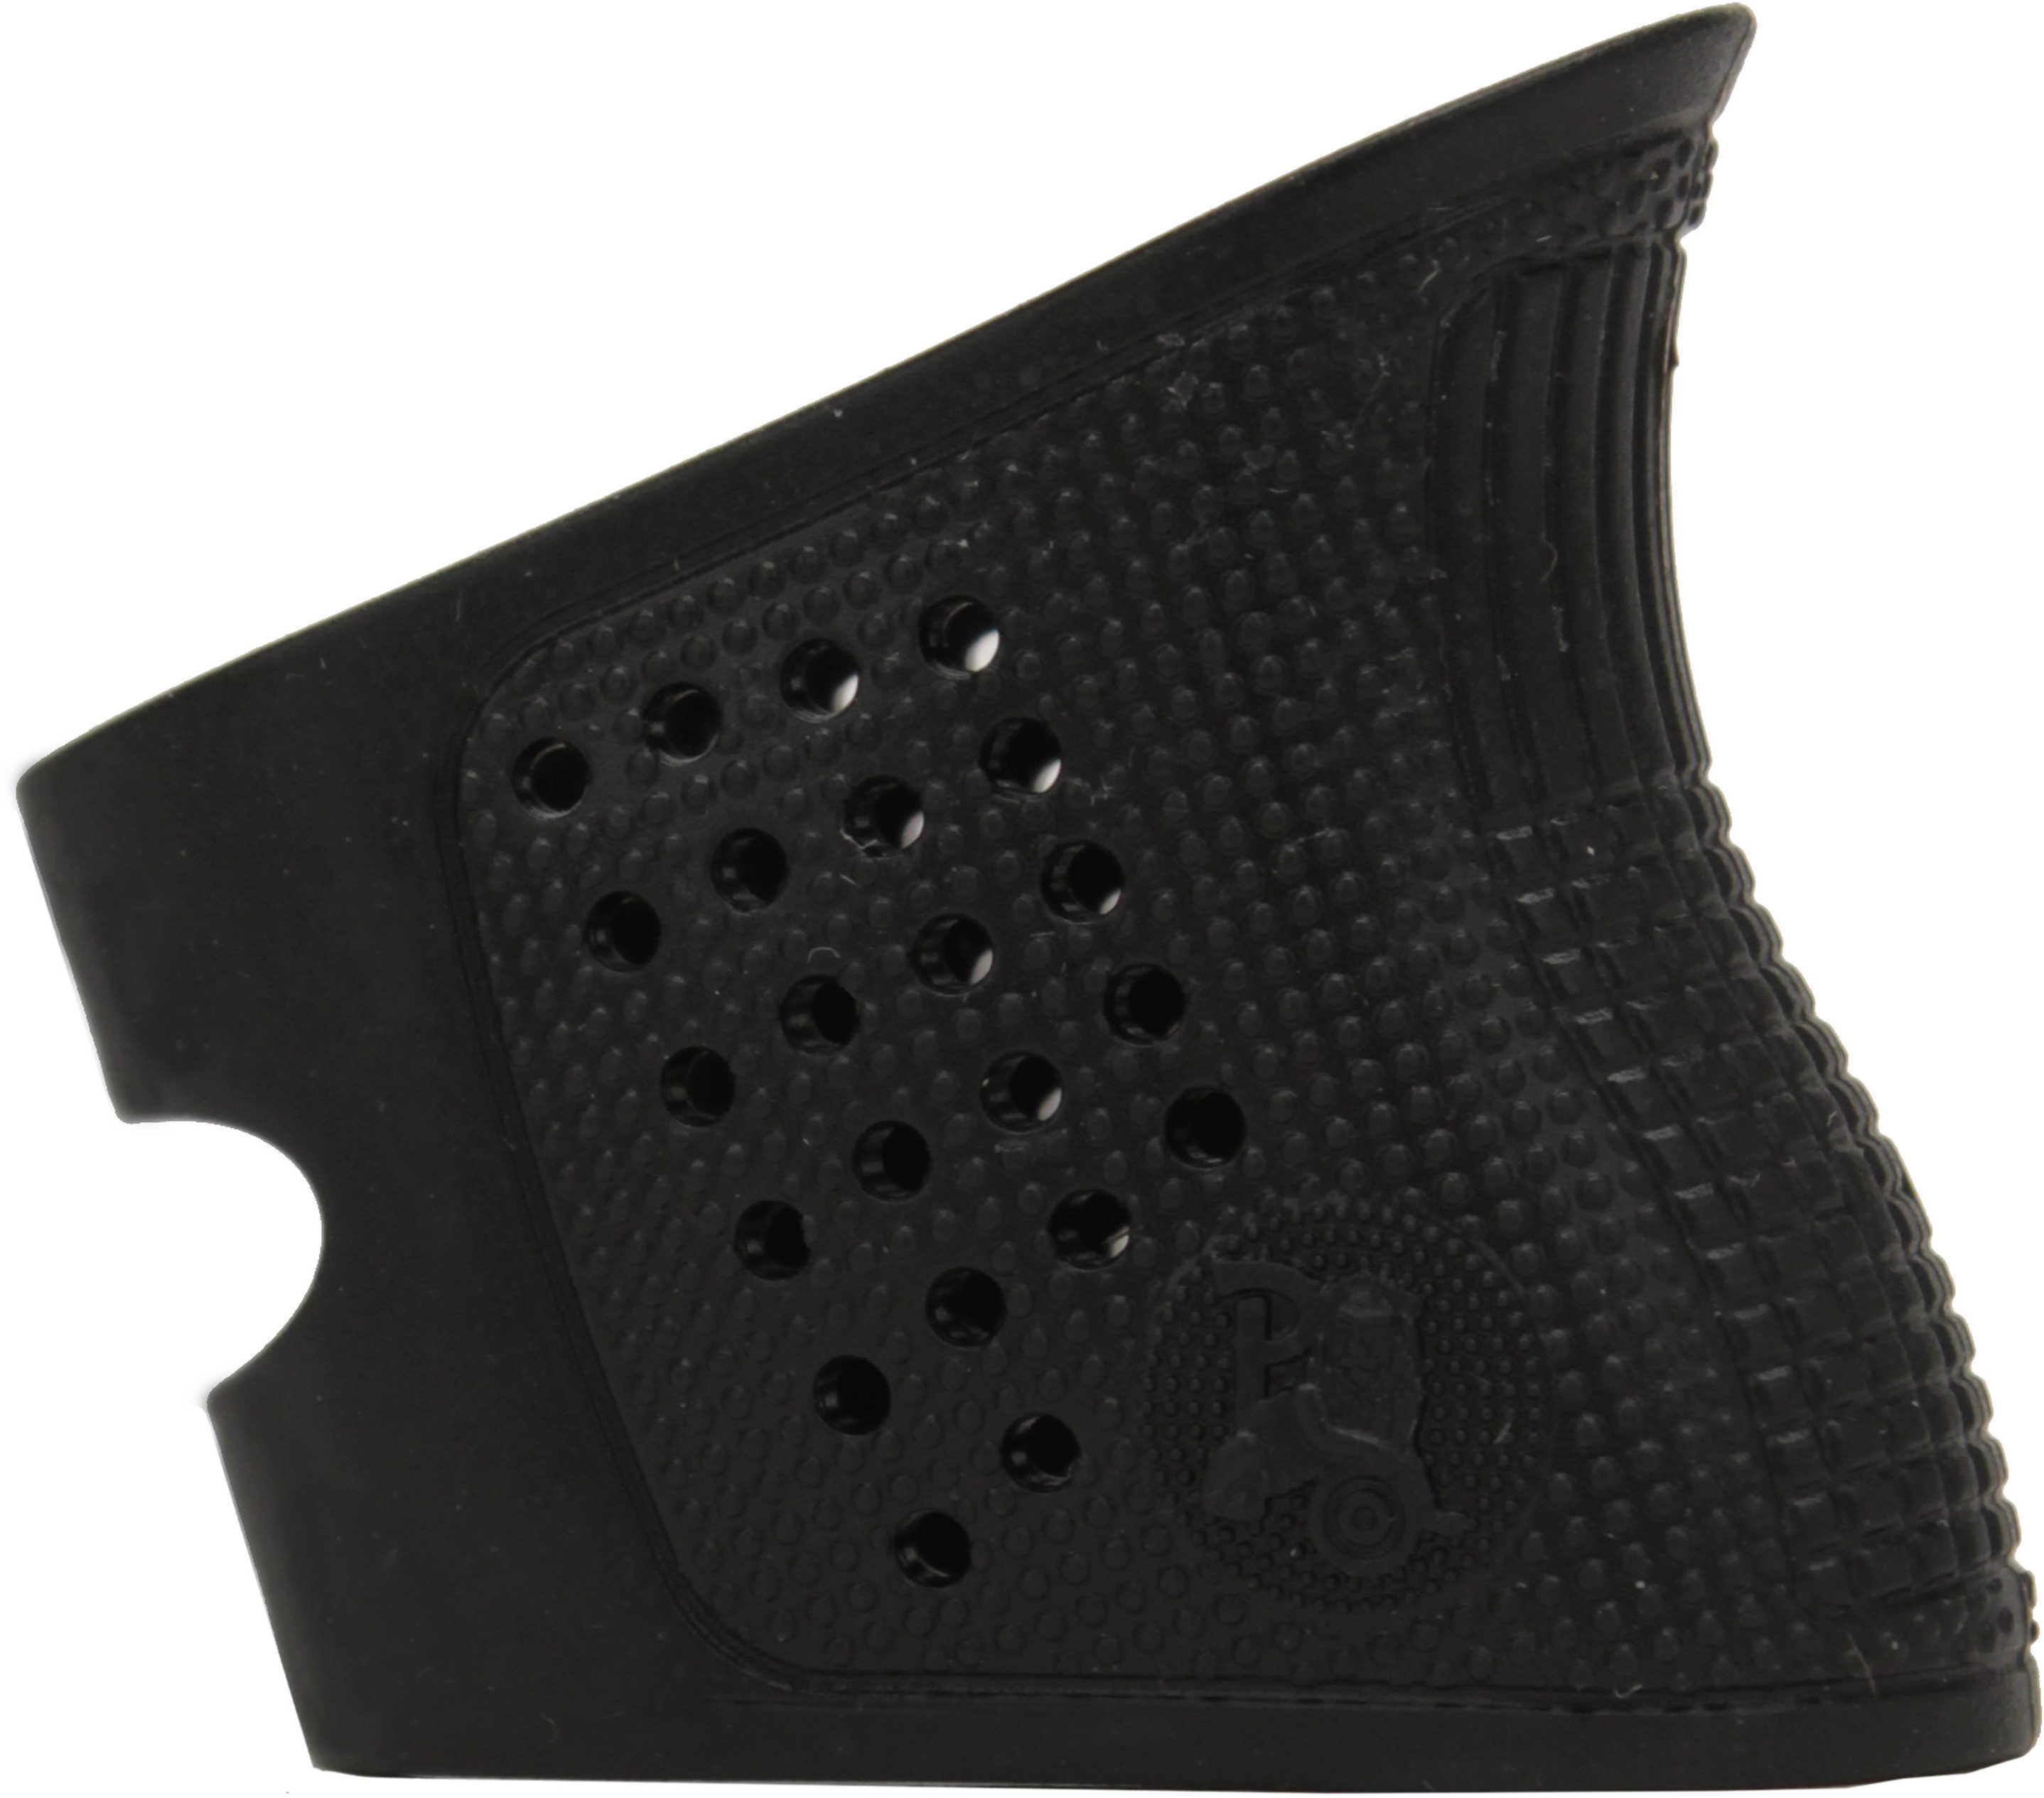 Pachmayr Tactical Grip Glove For Glock Sub Compact